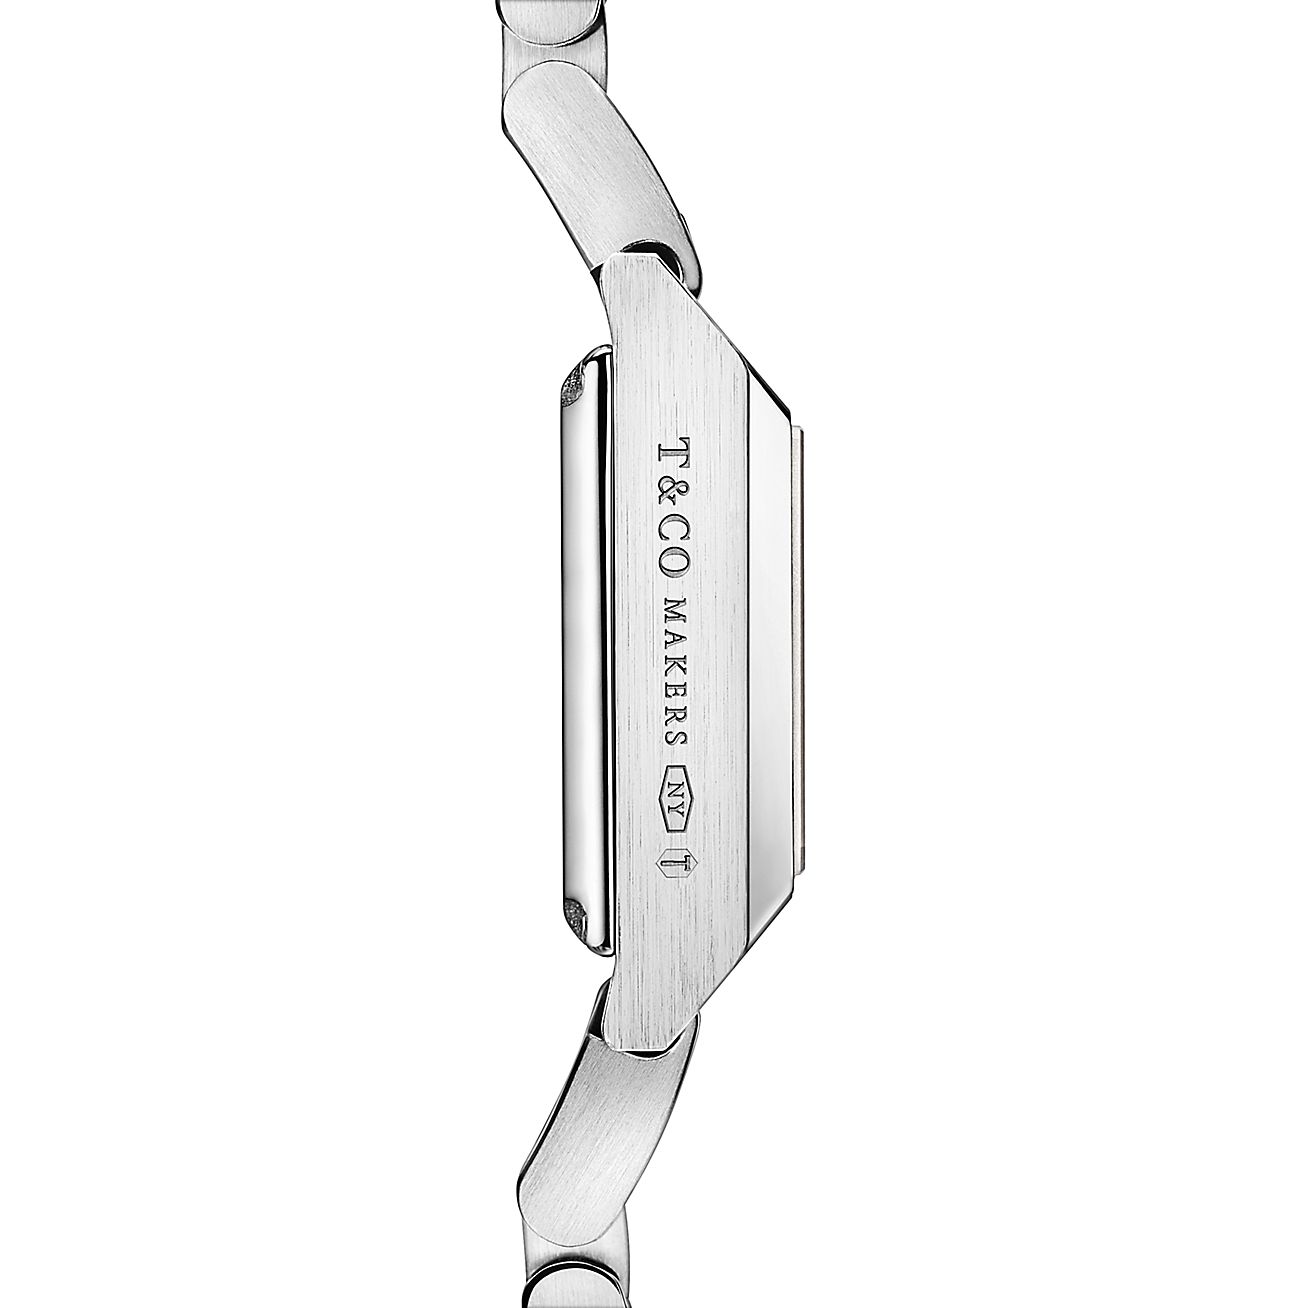 Tiffany 1837 Makers 16 mm Square Watch in Stainless Steel with a